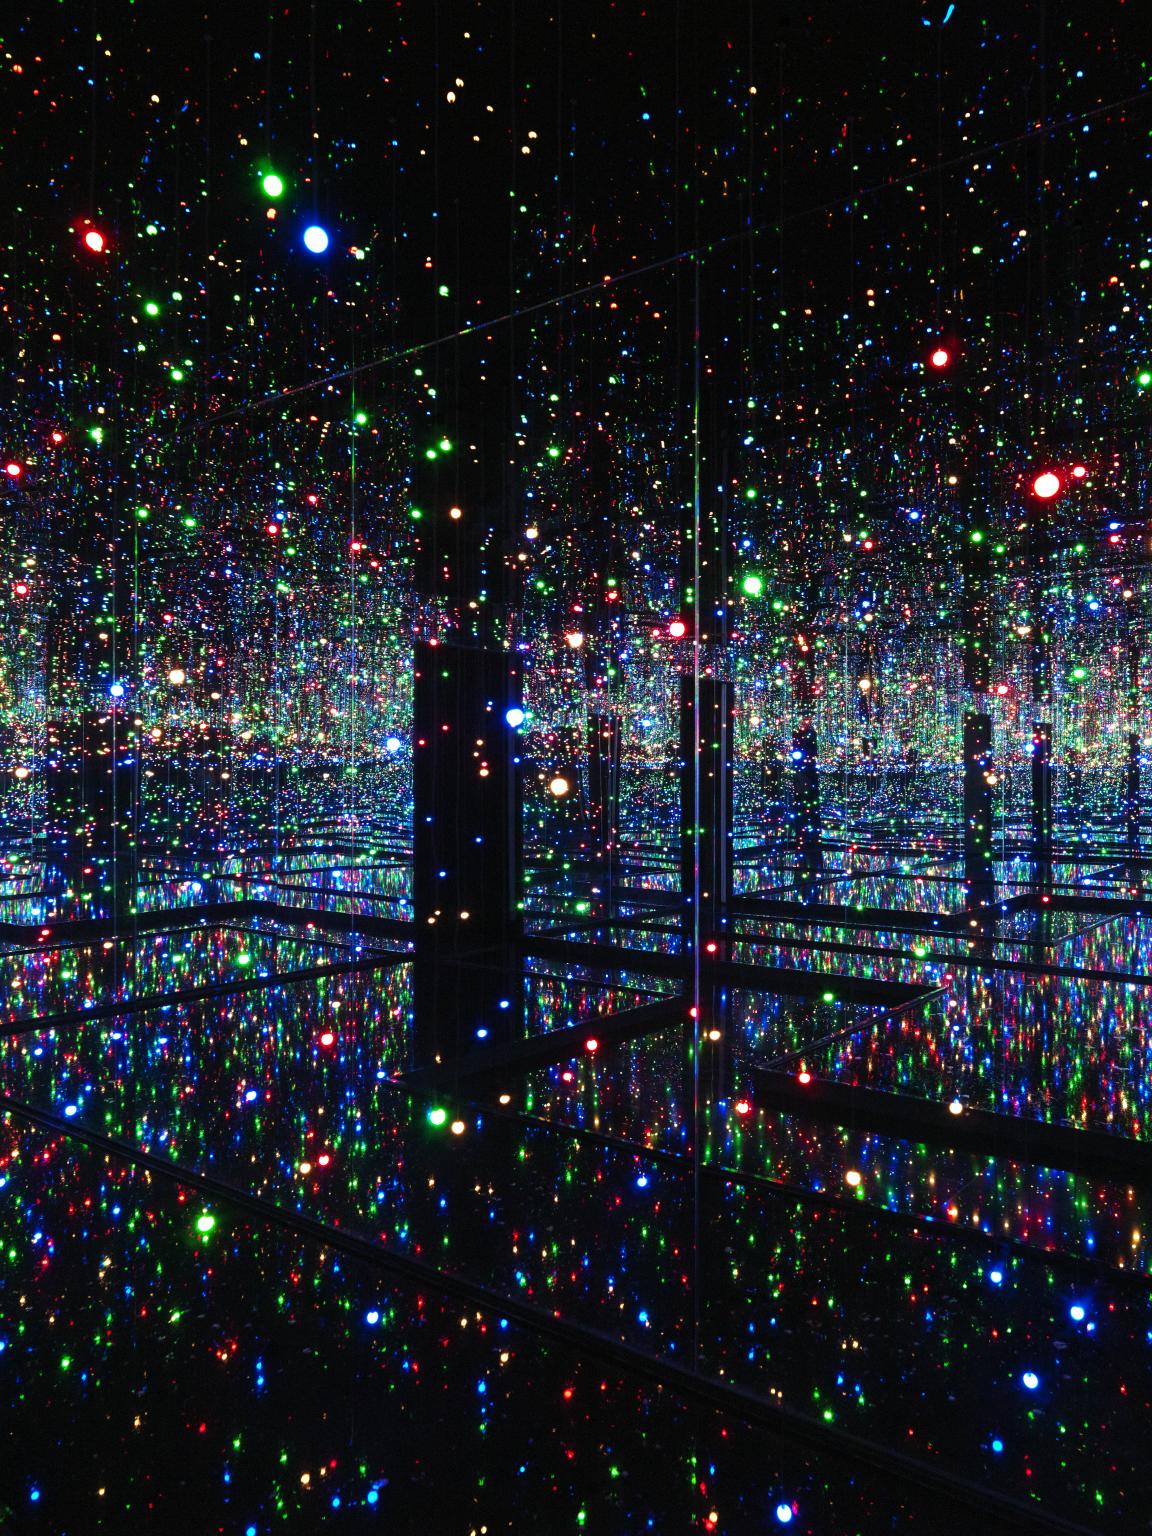 Infinity Mirrored Room - Filled with the Brilliance of Life', Yayoi Kusama,  2011/2017